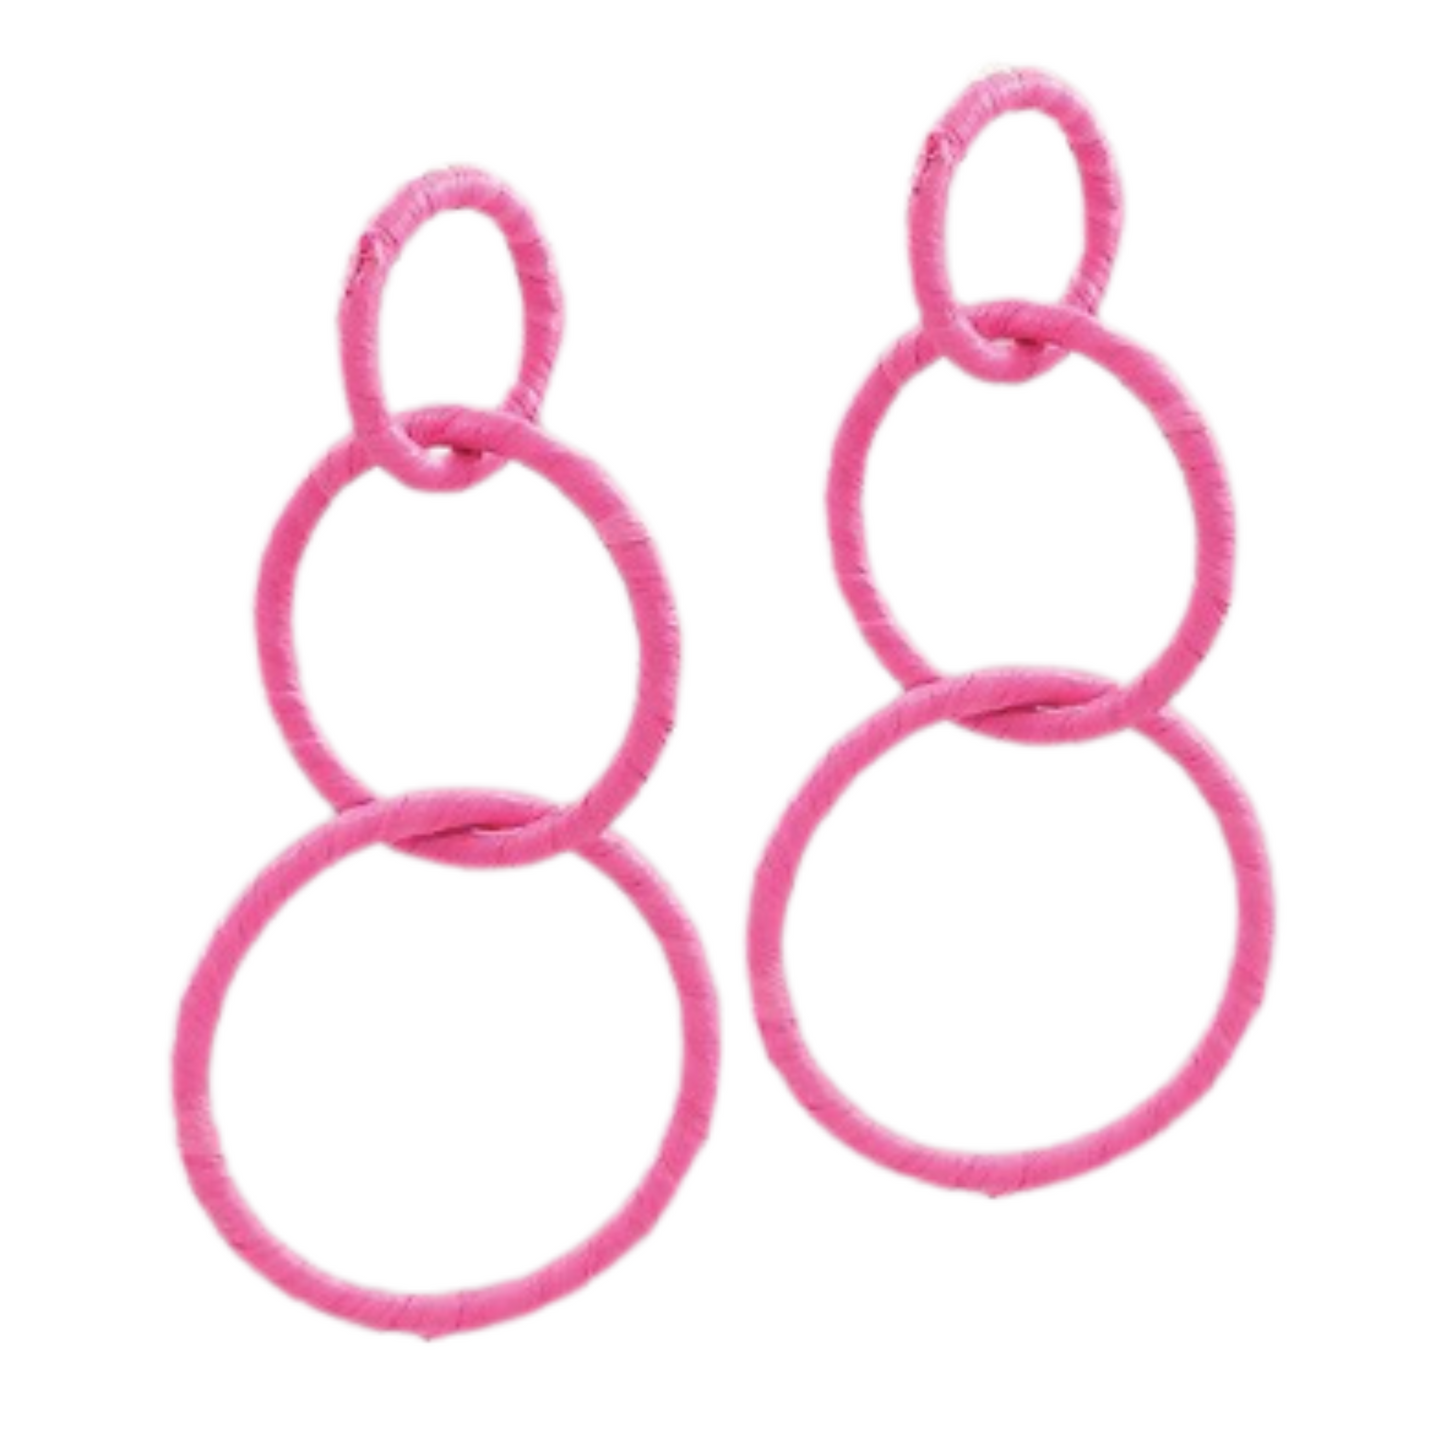 These Wrapped Raffia 3 Circle Drop Earrings offer a unique and stylish addition to any outfit. The raffia wrapping adds a natural touch, while the fuchsia color brings a pop of boldness. The dangling design creates movement and adds interest to your look. Elevate your style with these statement earrings.